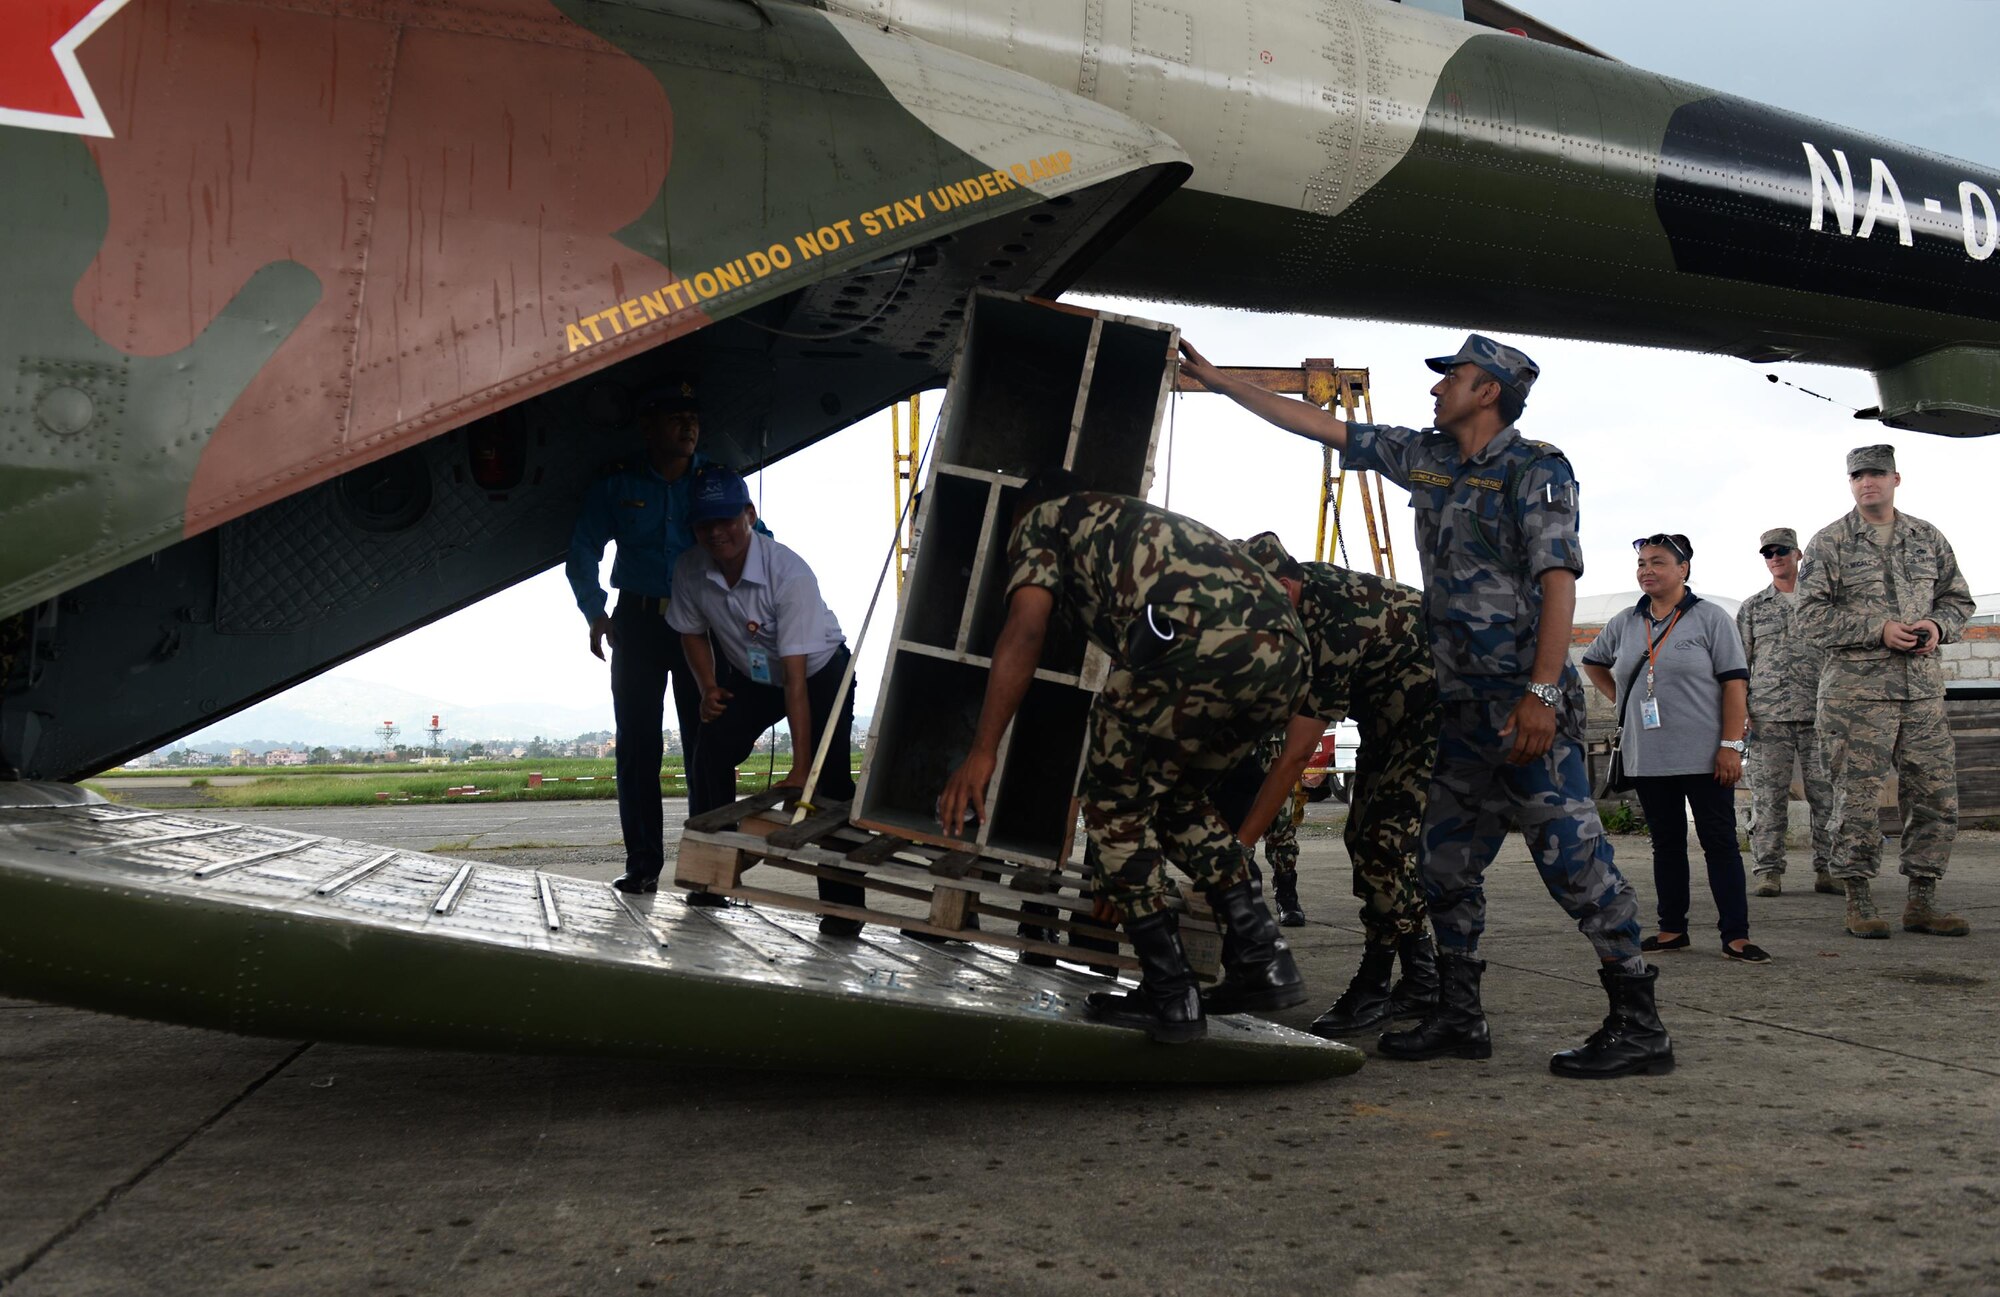 Participants of a subject-matter expert exchange load an irregularly sized object onto an MI-17V-5 Helicopter June 29, 2016, at Tribhuvan International Airport in Kathmandu, Nepal. During the SMEE, participants exchanged knowledge on forklift operation and loading procedures for aircraft cargo of varying dimensions. (U.S. Air Force photo by Staff Sgt. Benjamin Gonsier/Released)